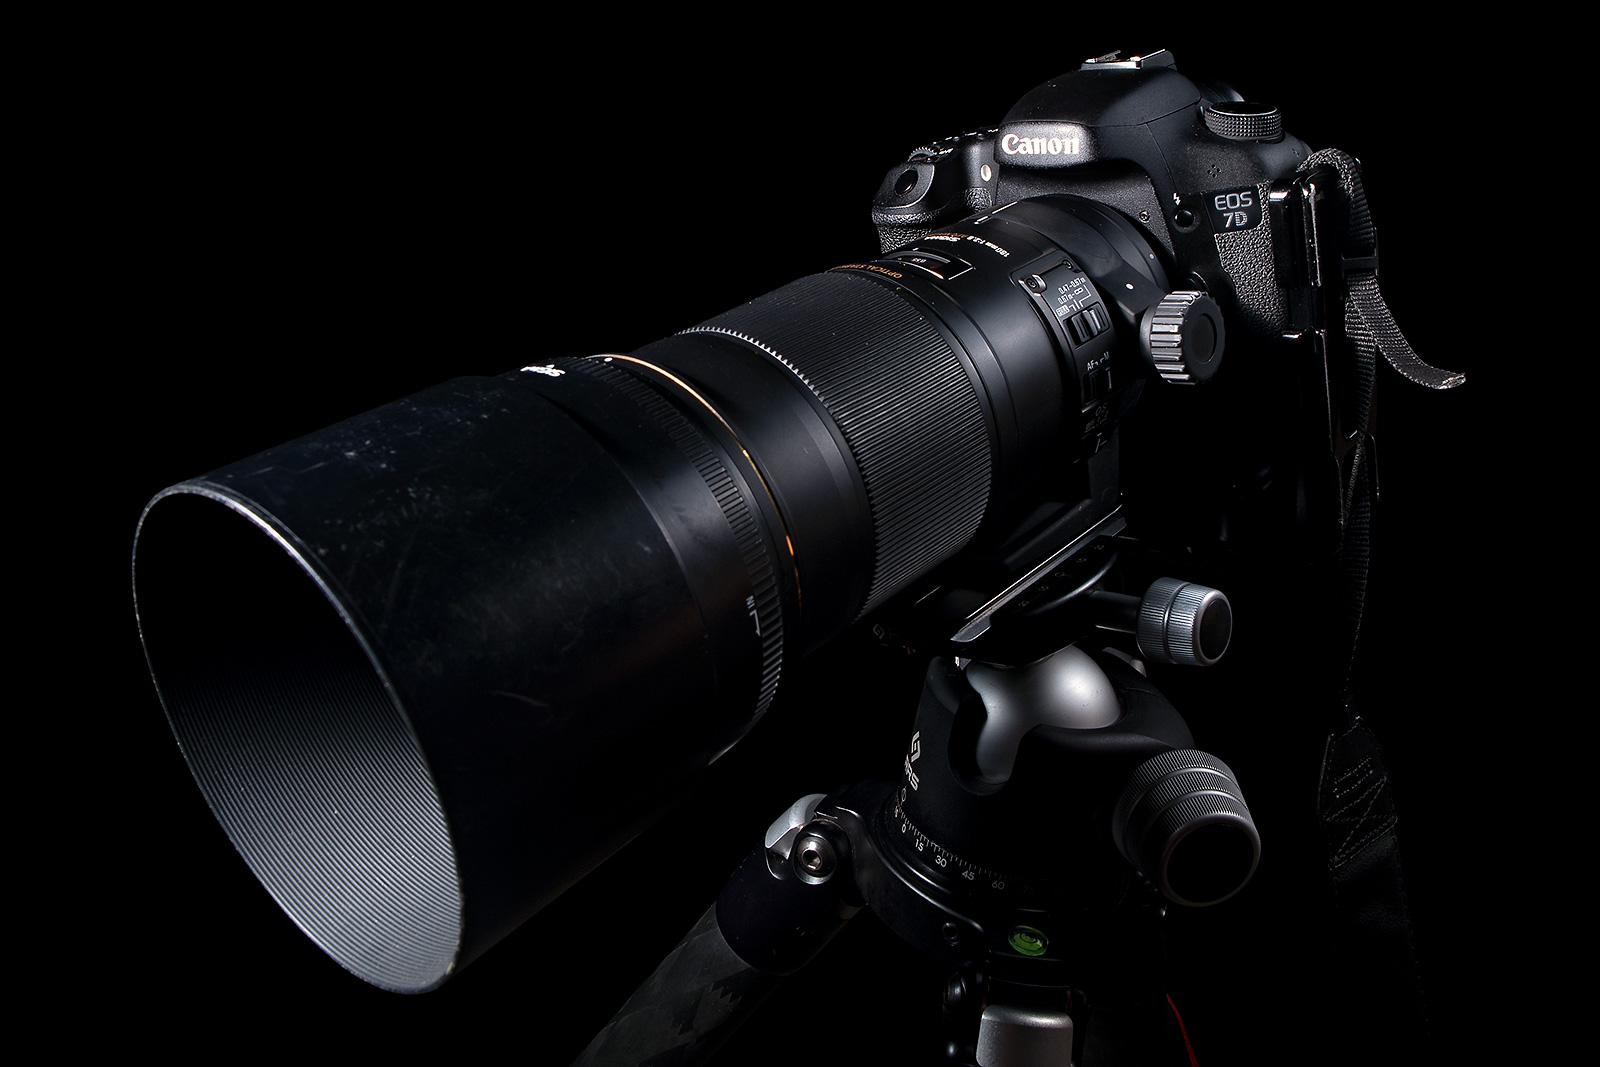 Image showing the Sigma 180mm Macro Lens